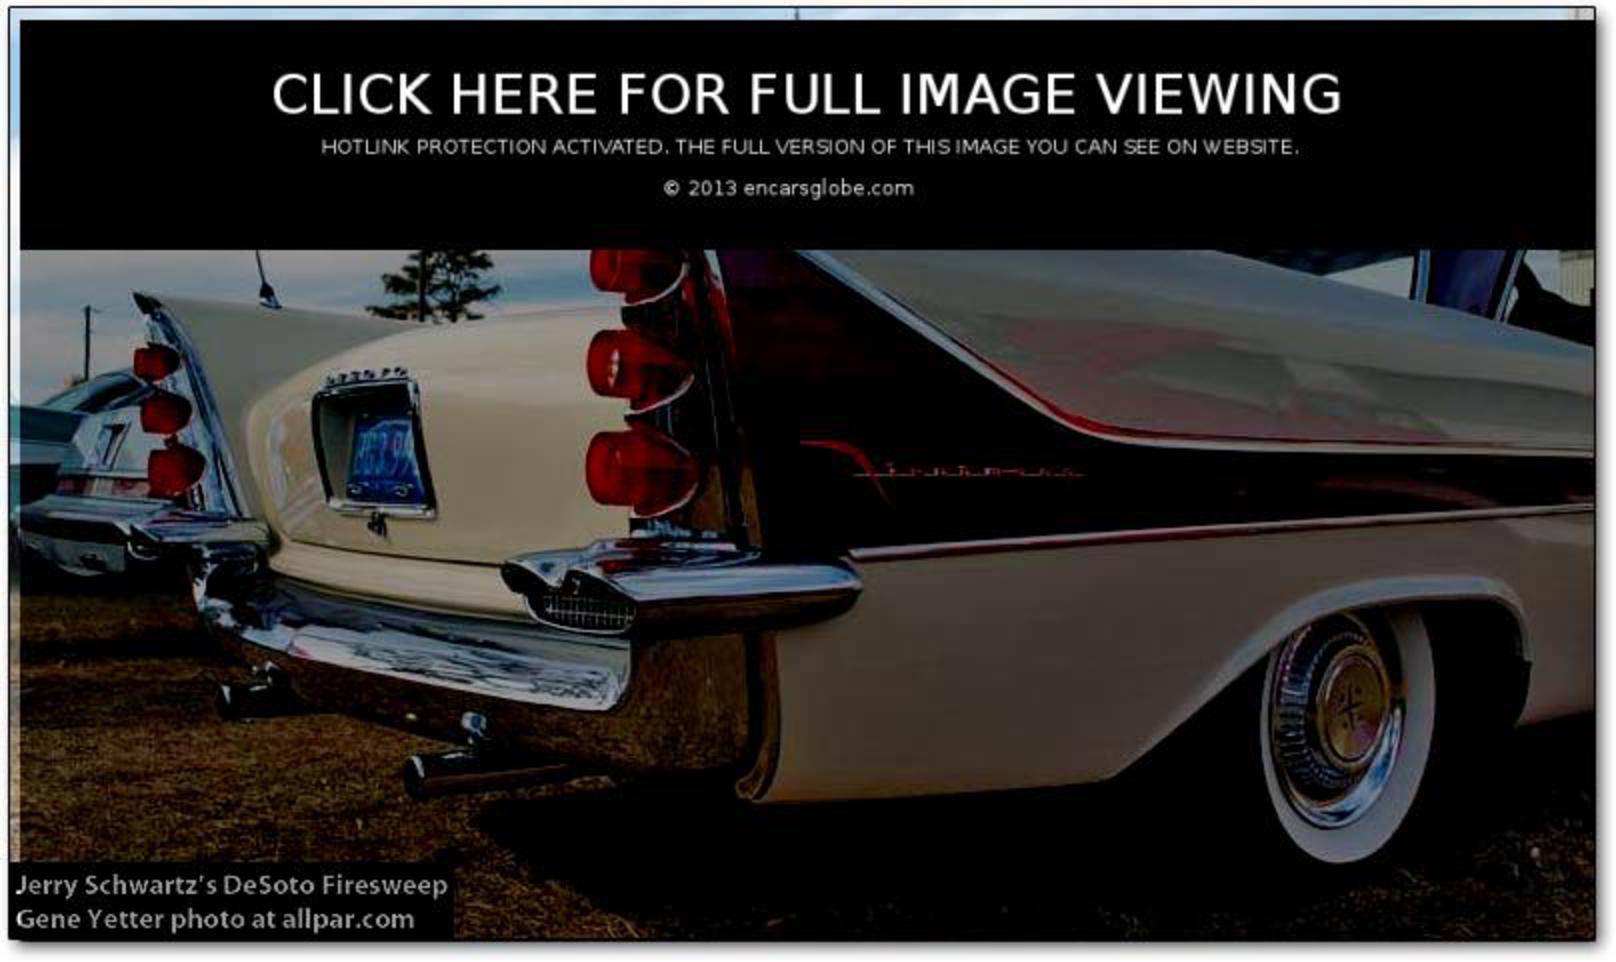 De Soto Firesweep conv Photo Gallery: Photo #03 out of 11, Image ...